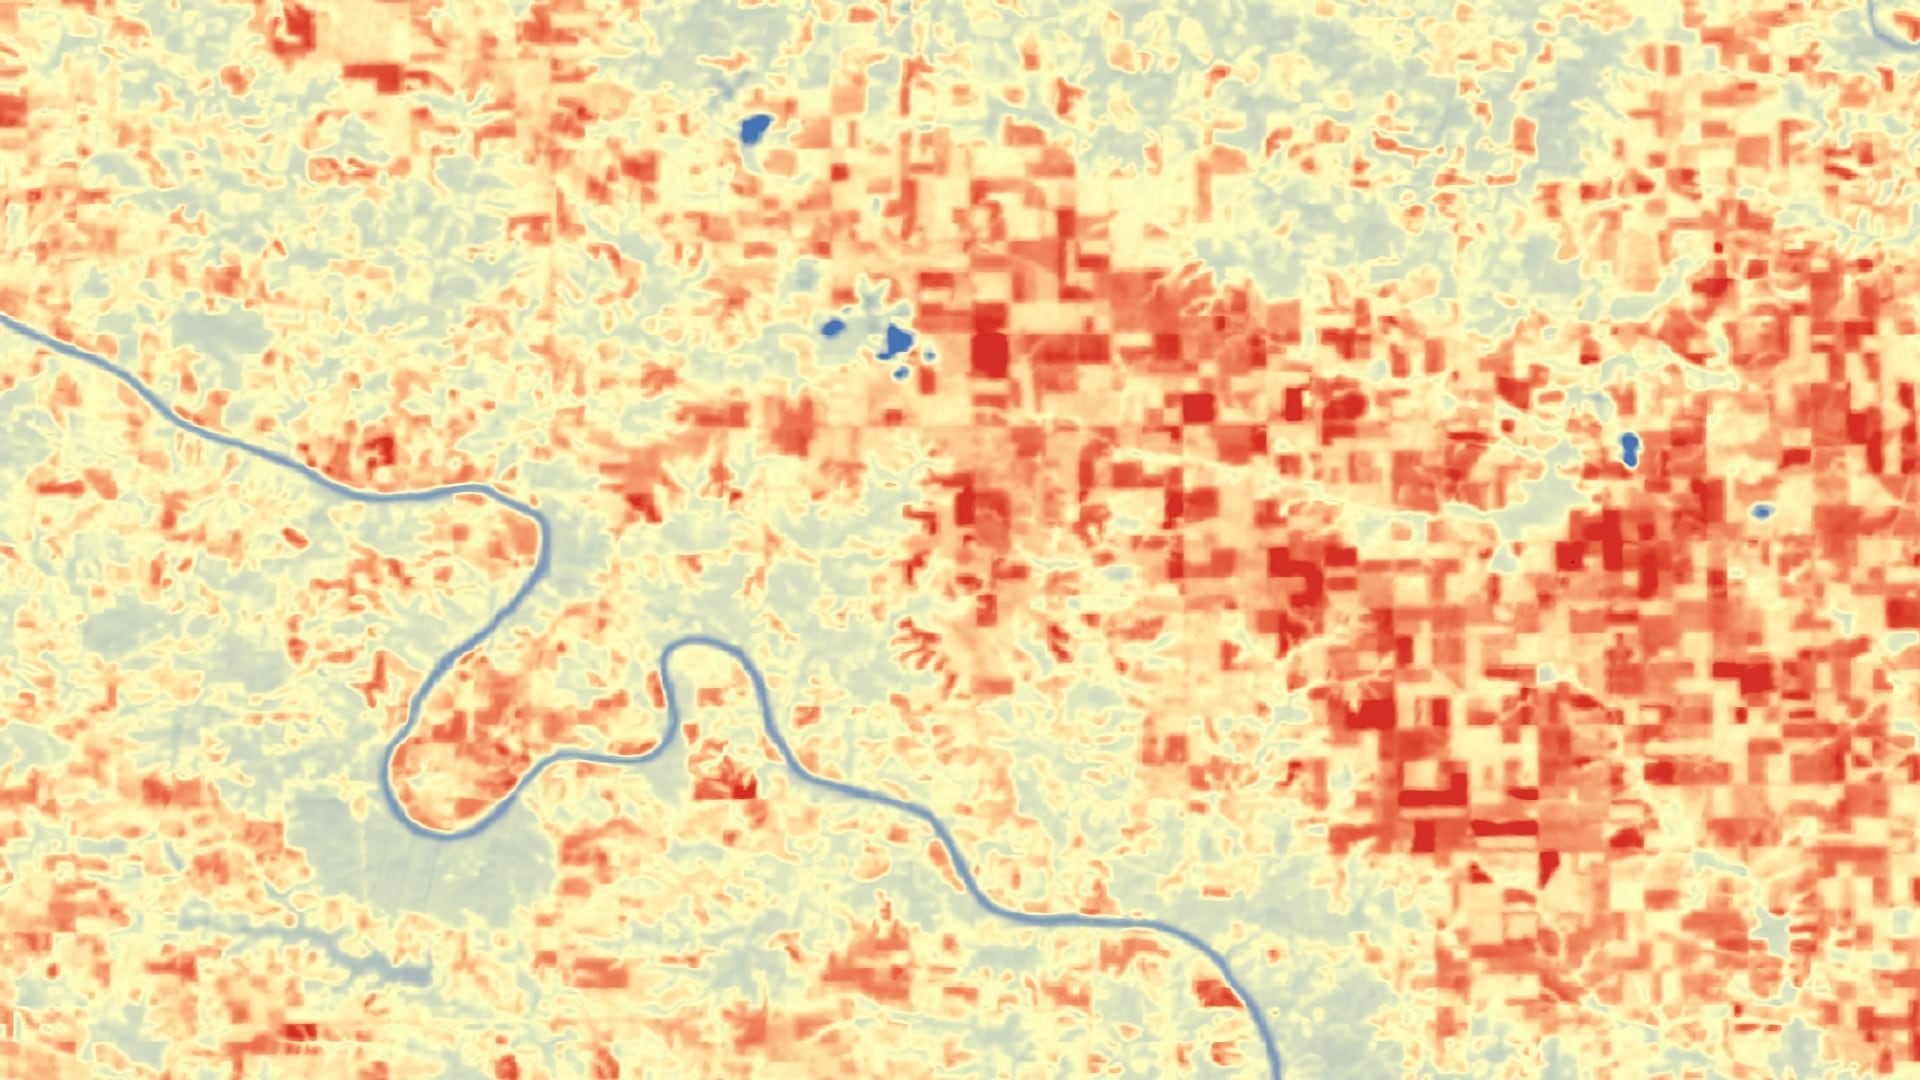 Land surface temperature (LST) derived from September 2018 Landsat 8 TIRS data, processed with bands 4,5, and 10. This image was taken over southeastern Iowa around the Des Moines River. The darkest red values indicate higher temperatures around 40˚C while the darkest blue values indicate the lower temperatures around 24 ˚C. Higher temperatures indicate greater amounts of plant stress.